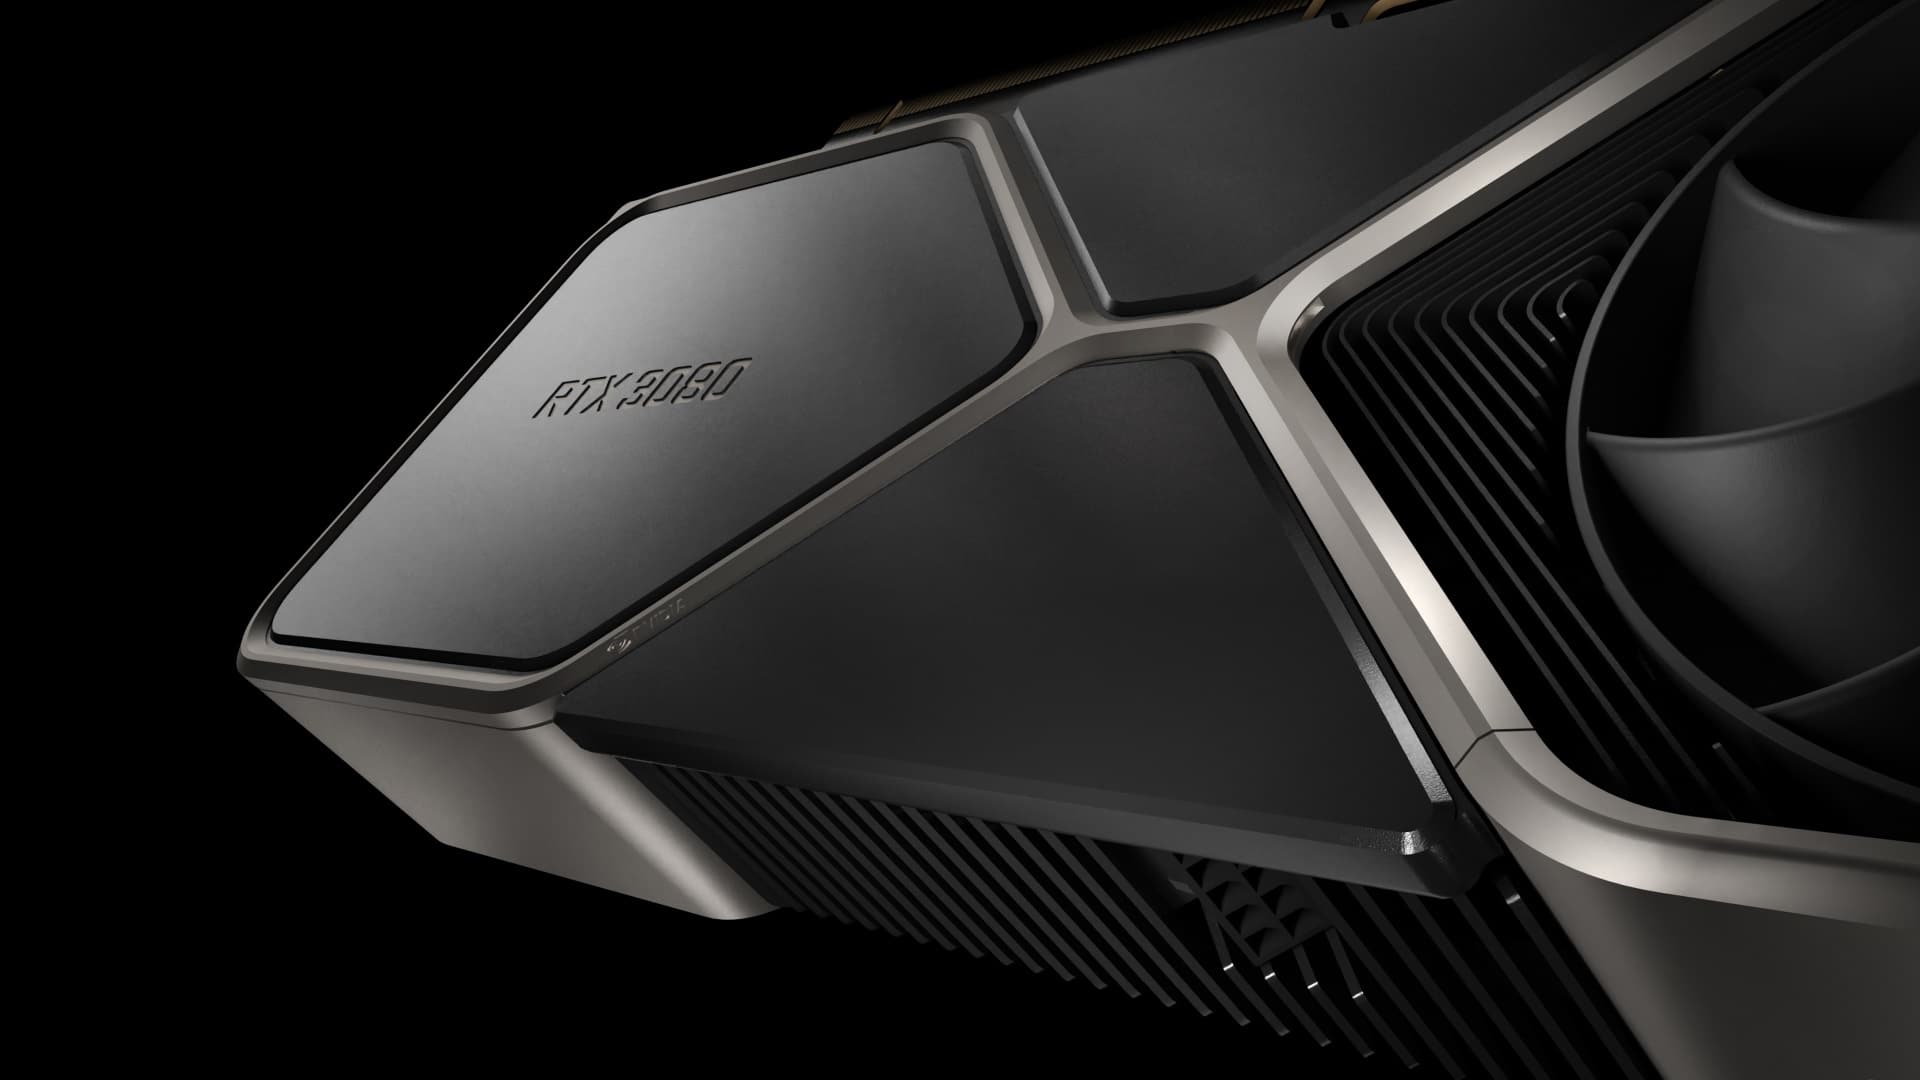 Speculators earned more than $ 15 million by reselling NVIDIA GeForce RTX 30 graphics cards